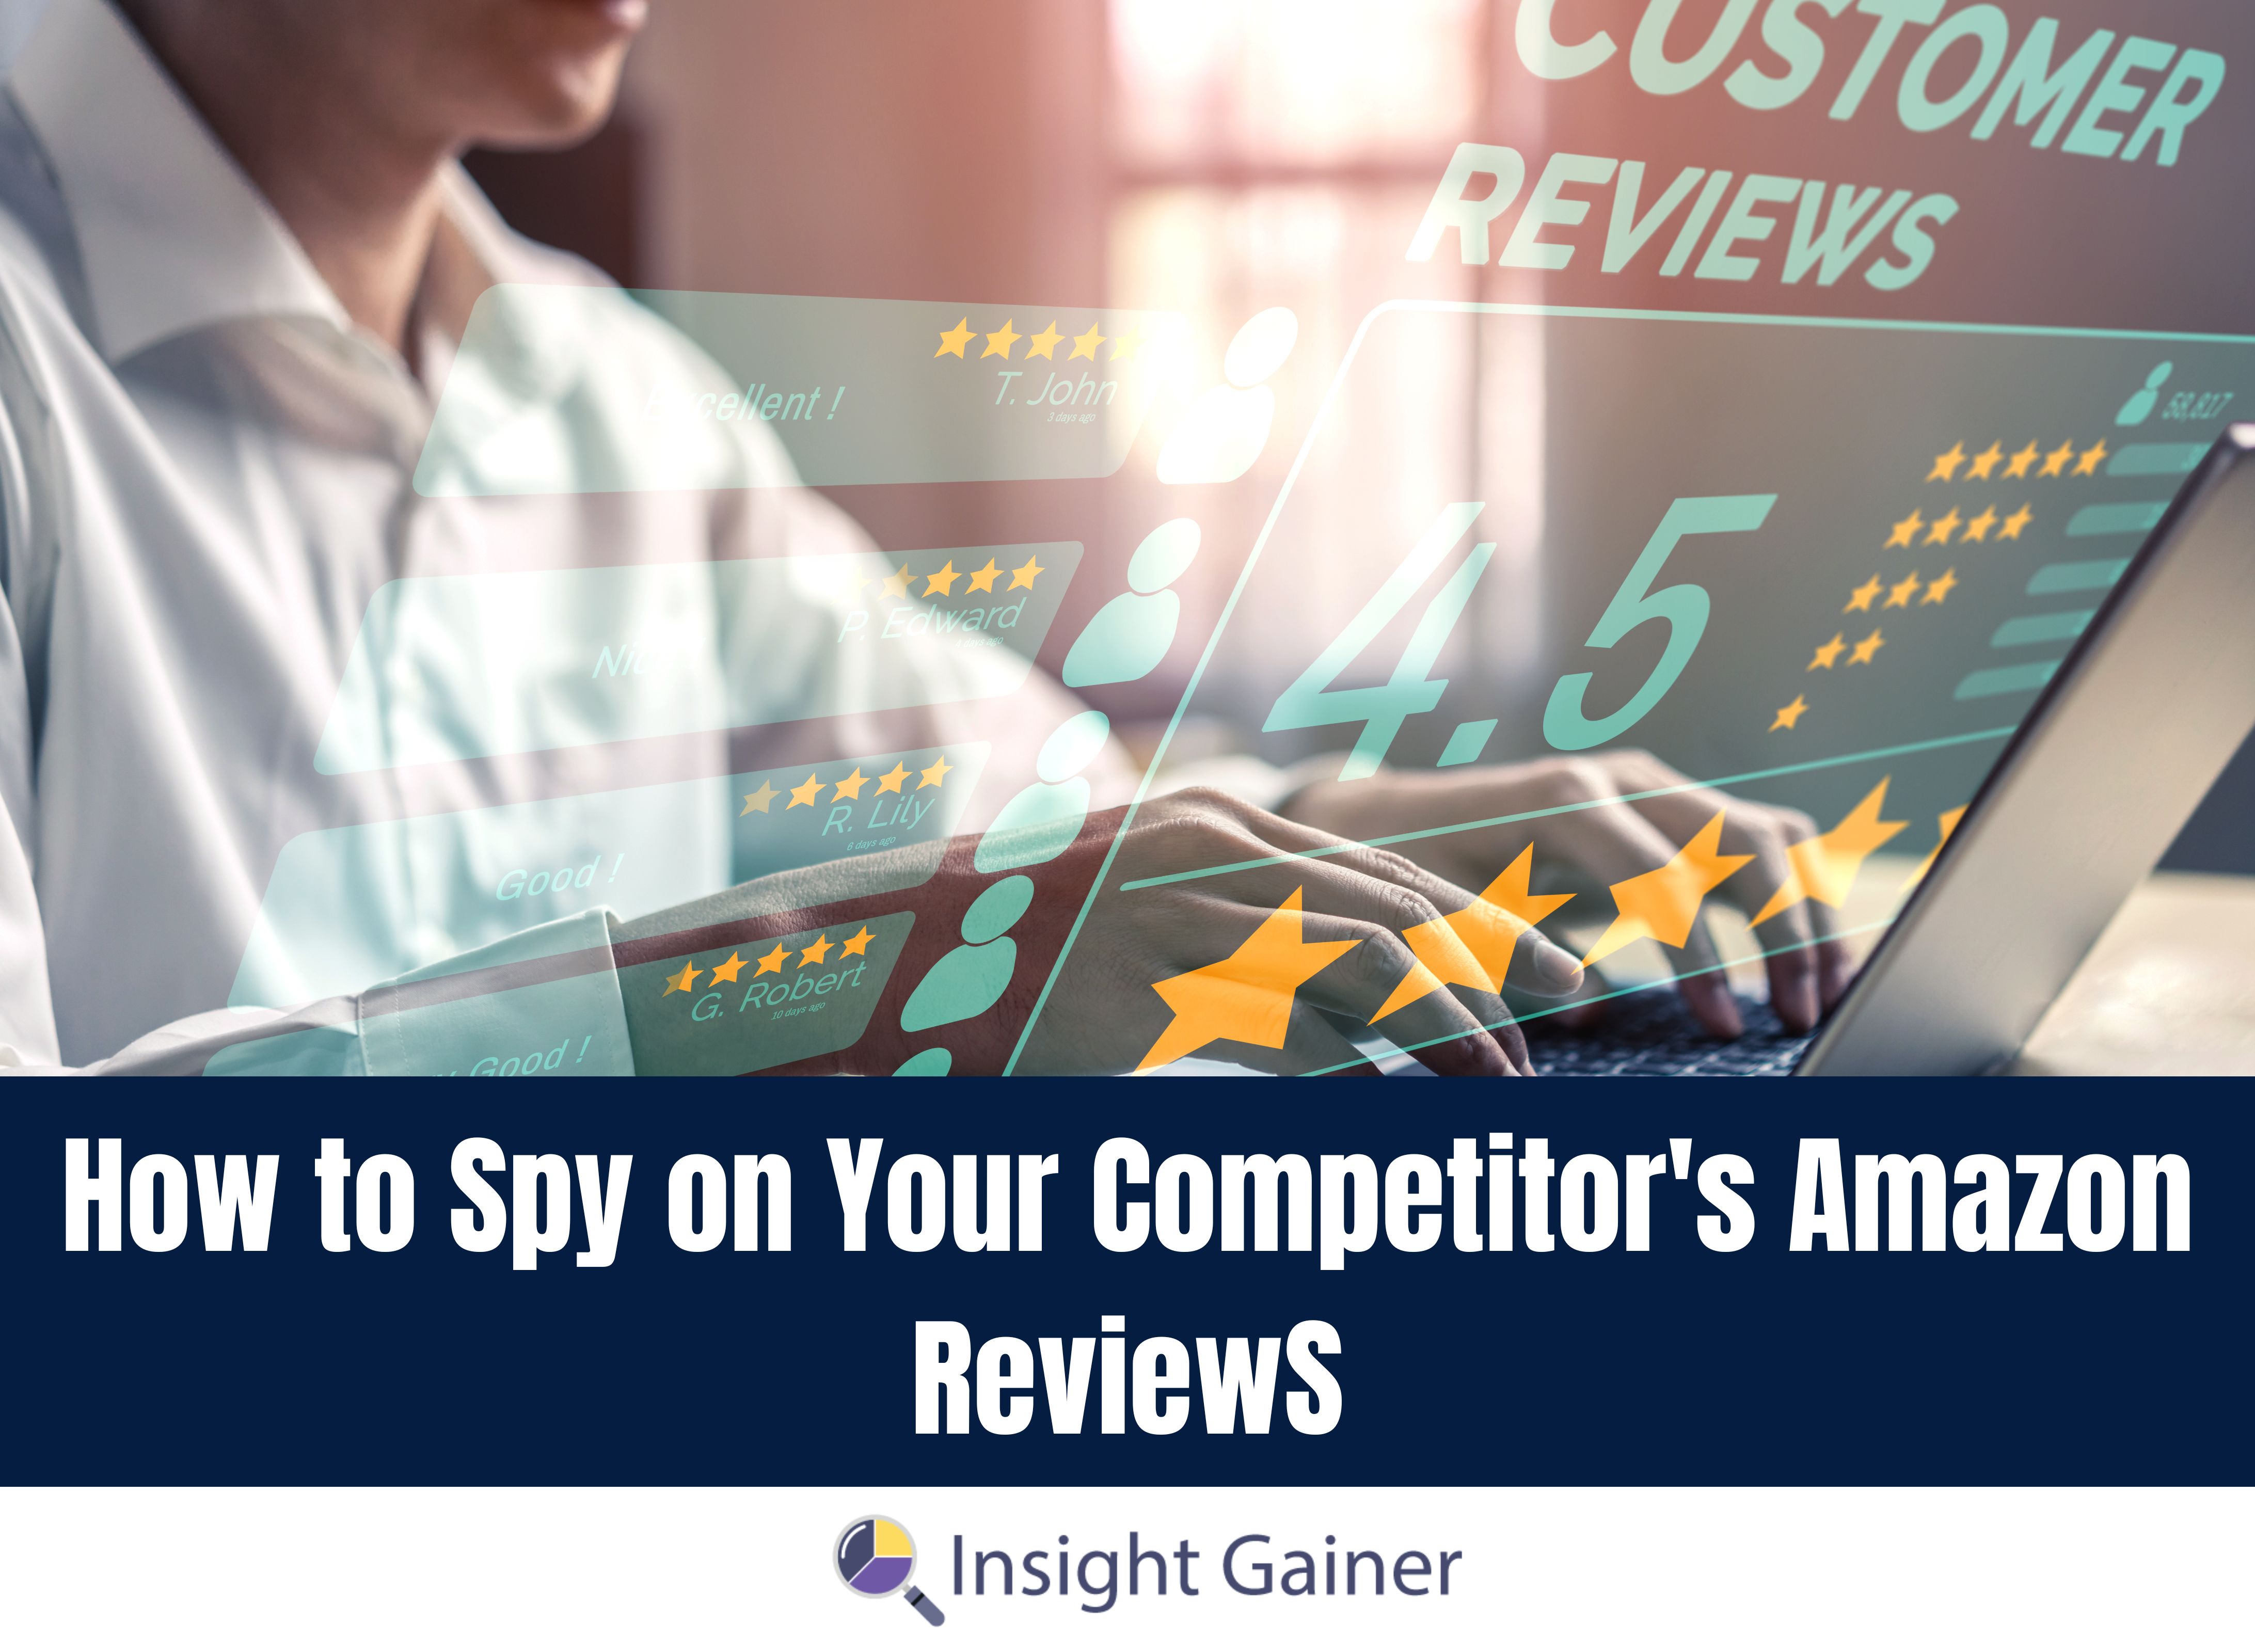 How to Spy on Your Competitor’s Amazon Reviews